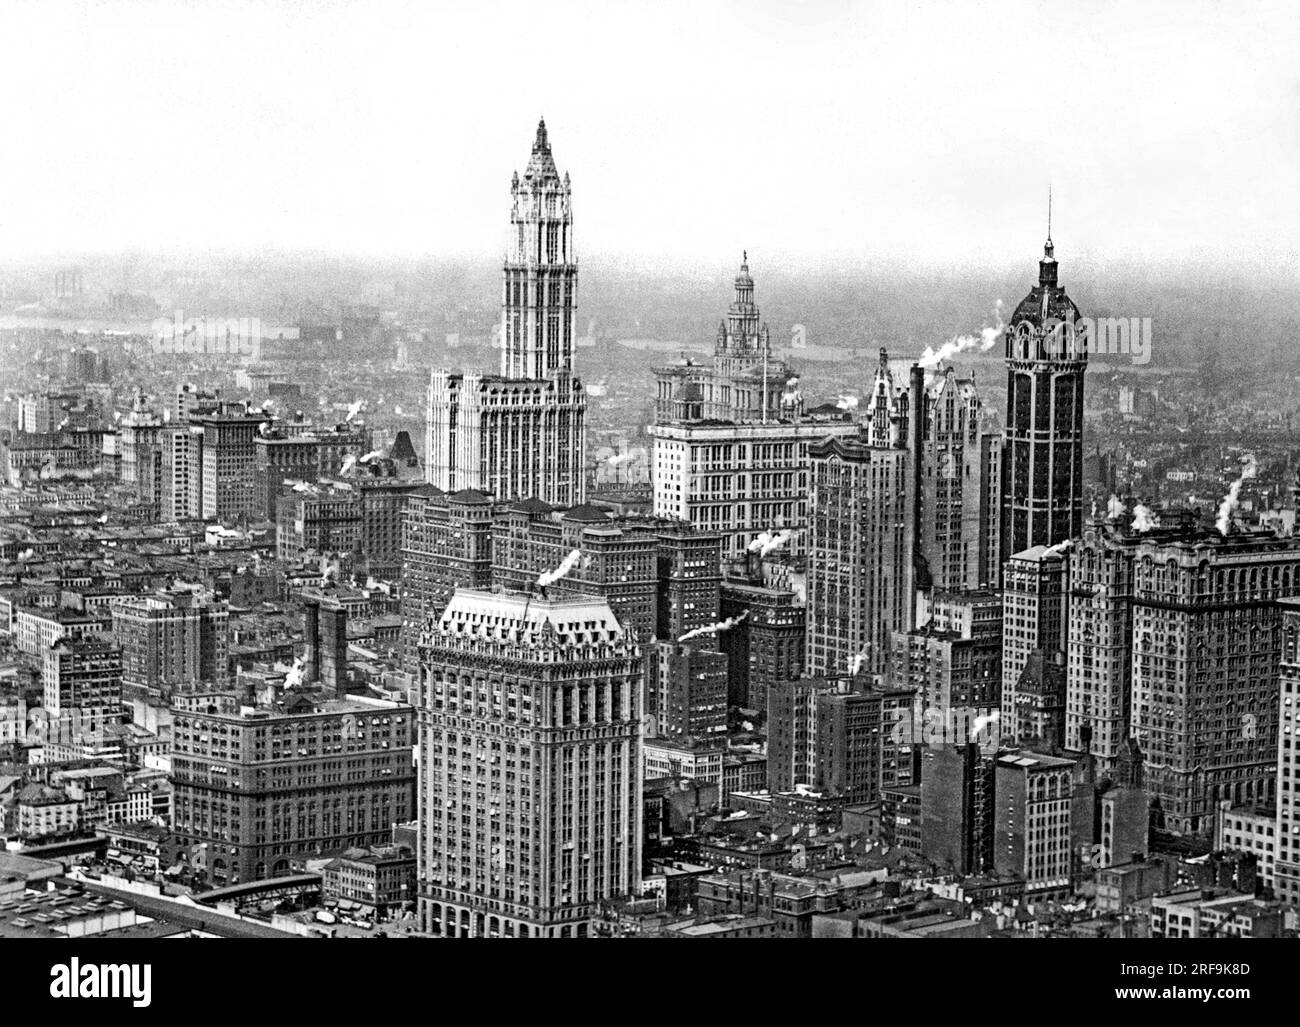 New York, New York:  c. 1915 The Financial District in New York City, with the Singer Building and its rounded  top at the right, and the Woolworth Building in the center. Stock Photo